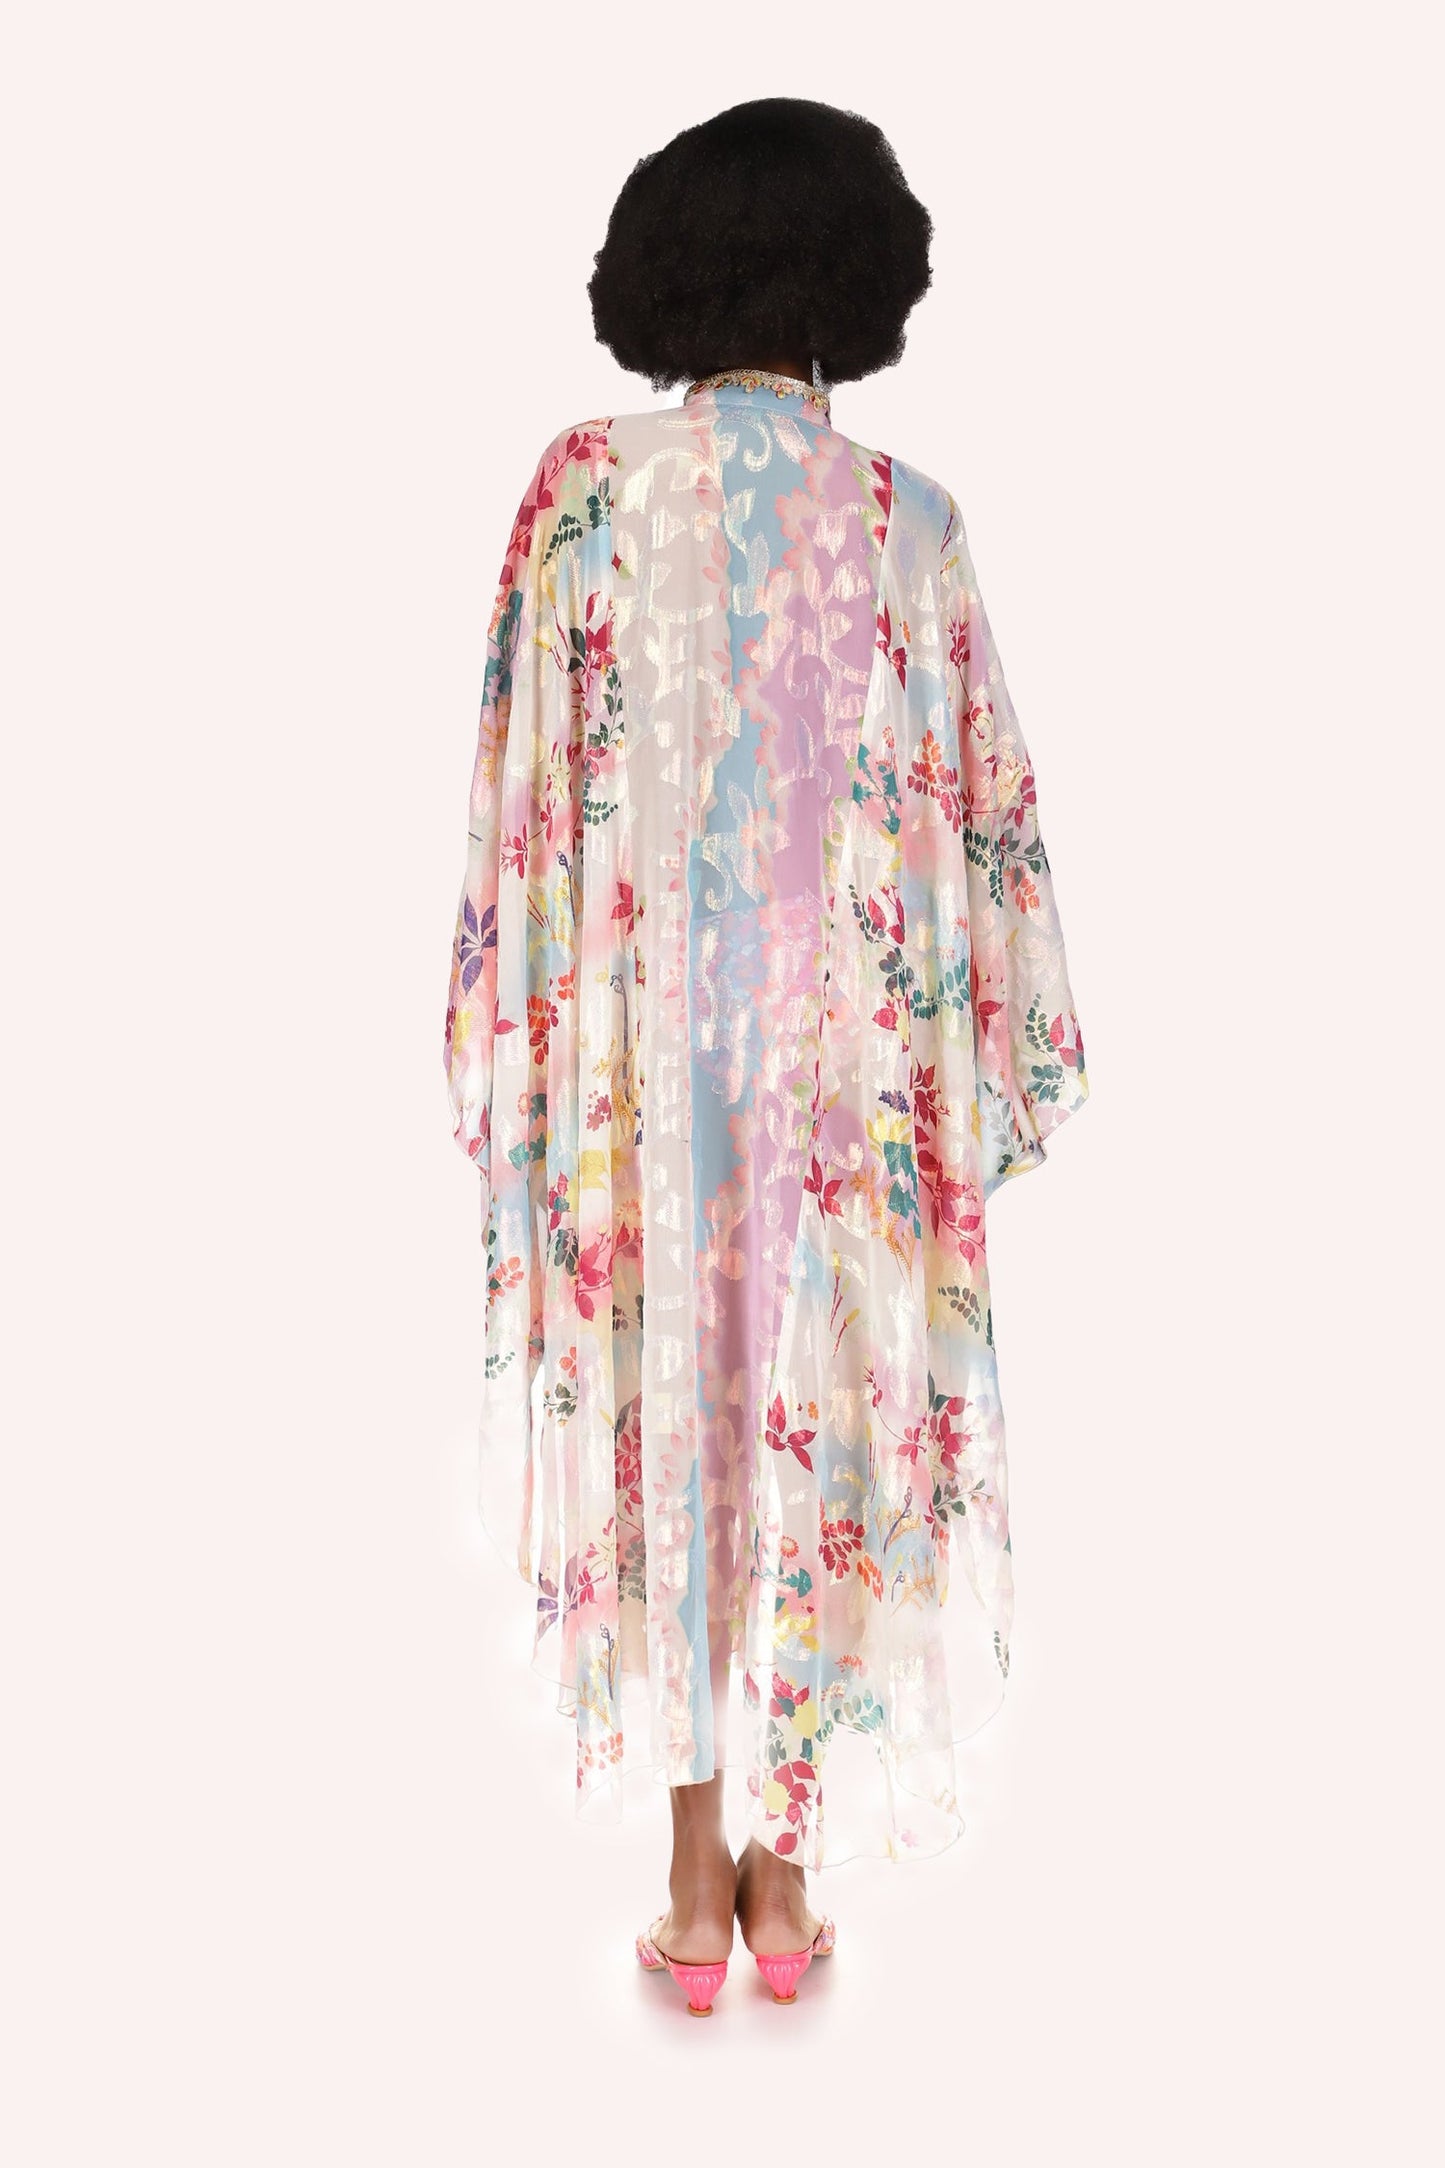 The overall shape of Atlantis Garden Kaftan is triangular, with a nice floral design